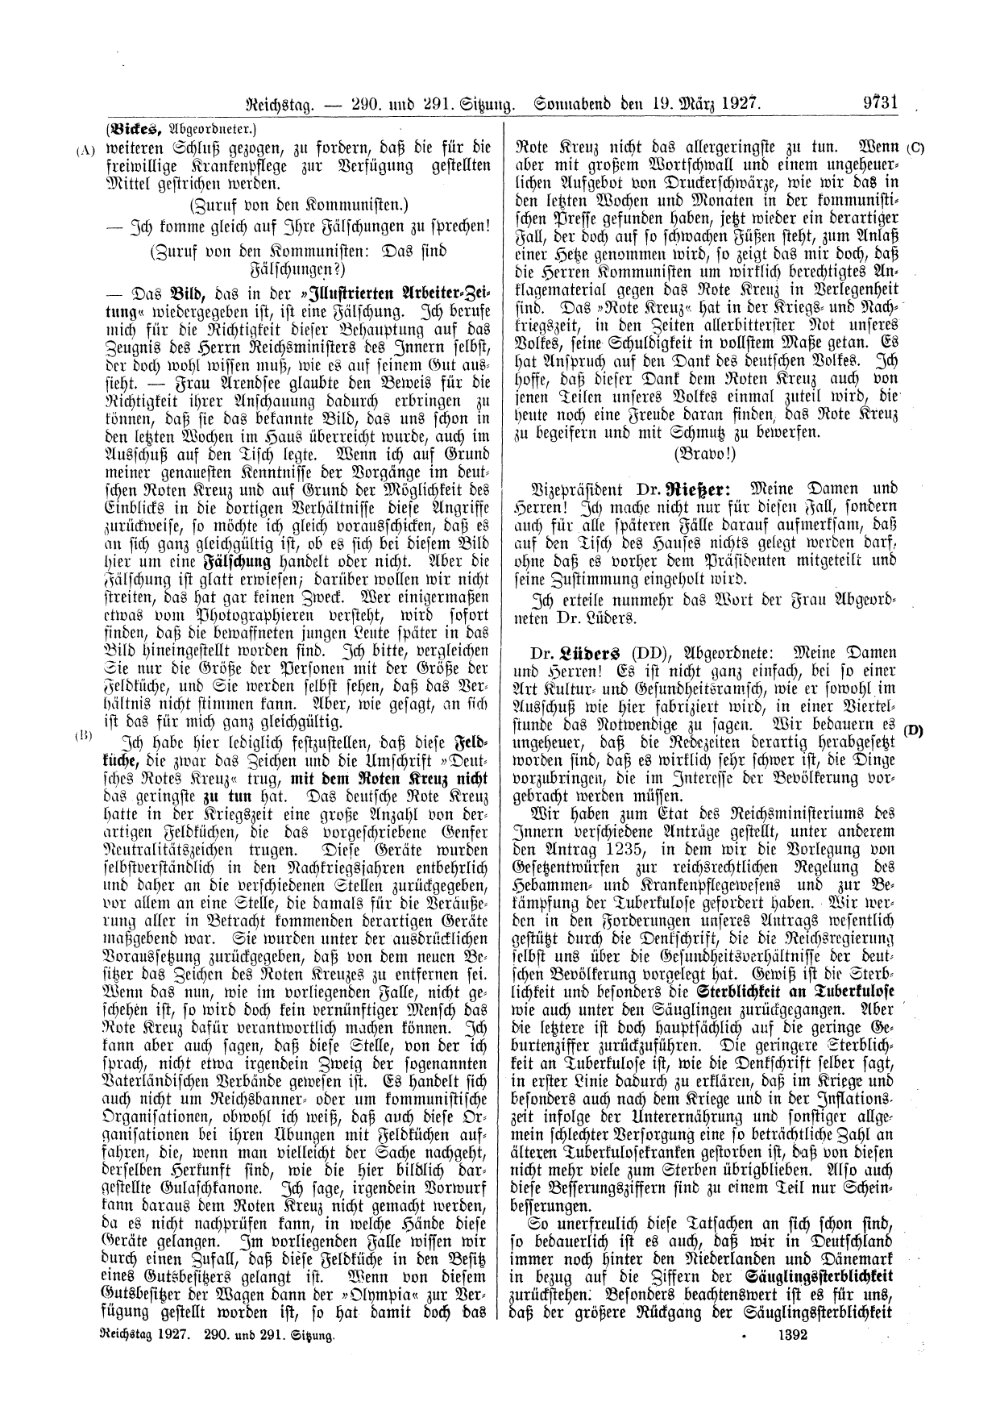 Scan of page 9731